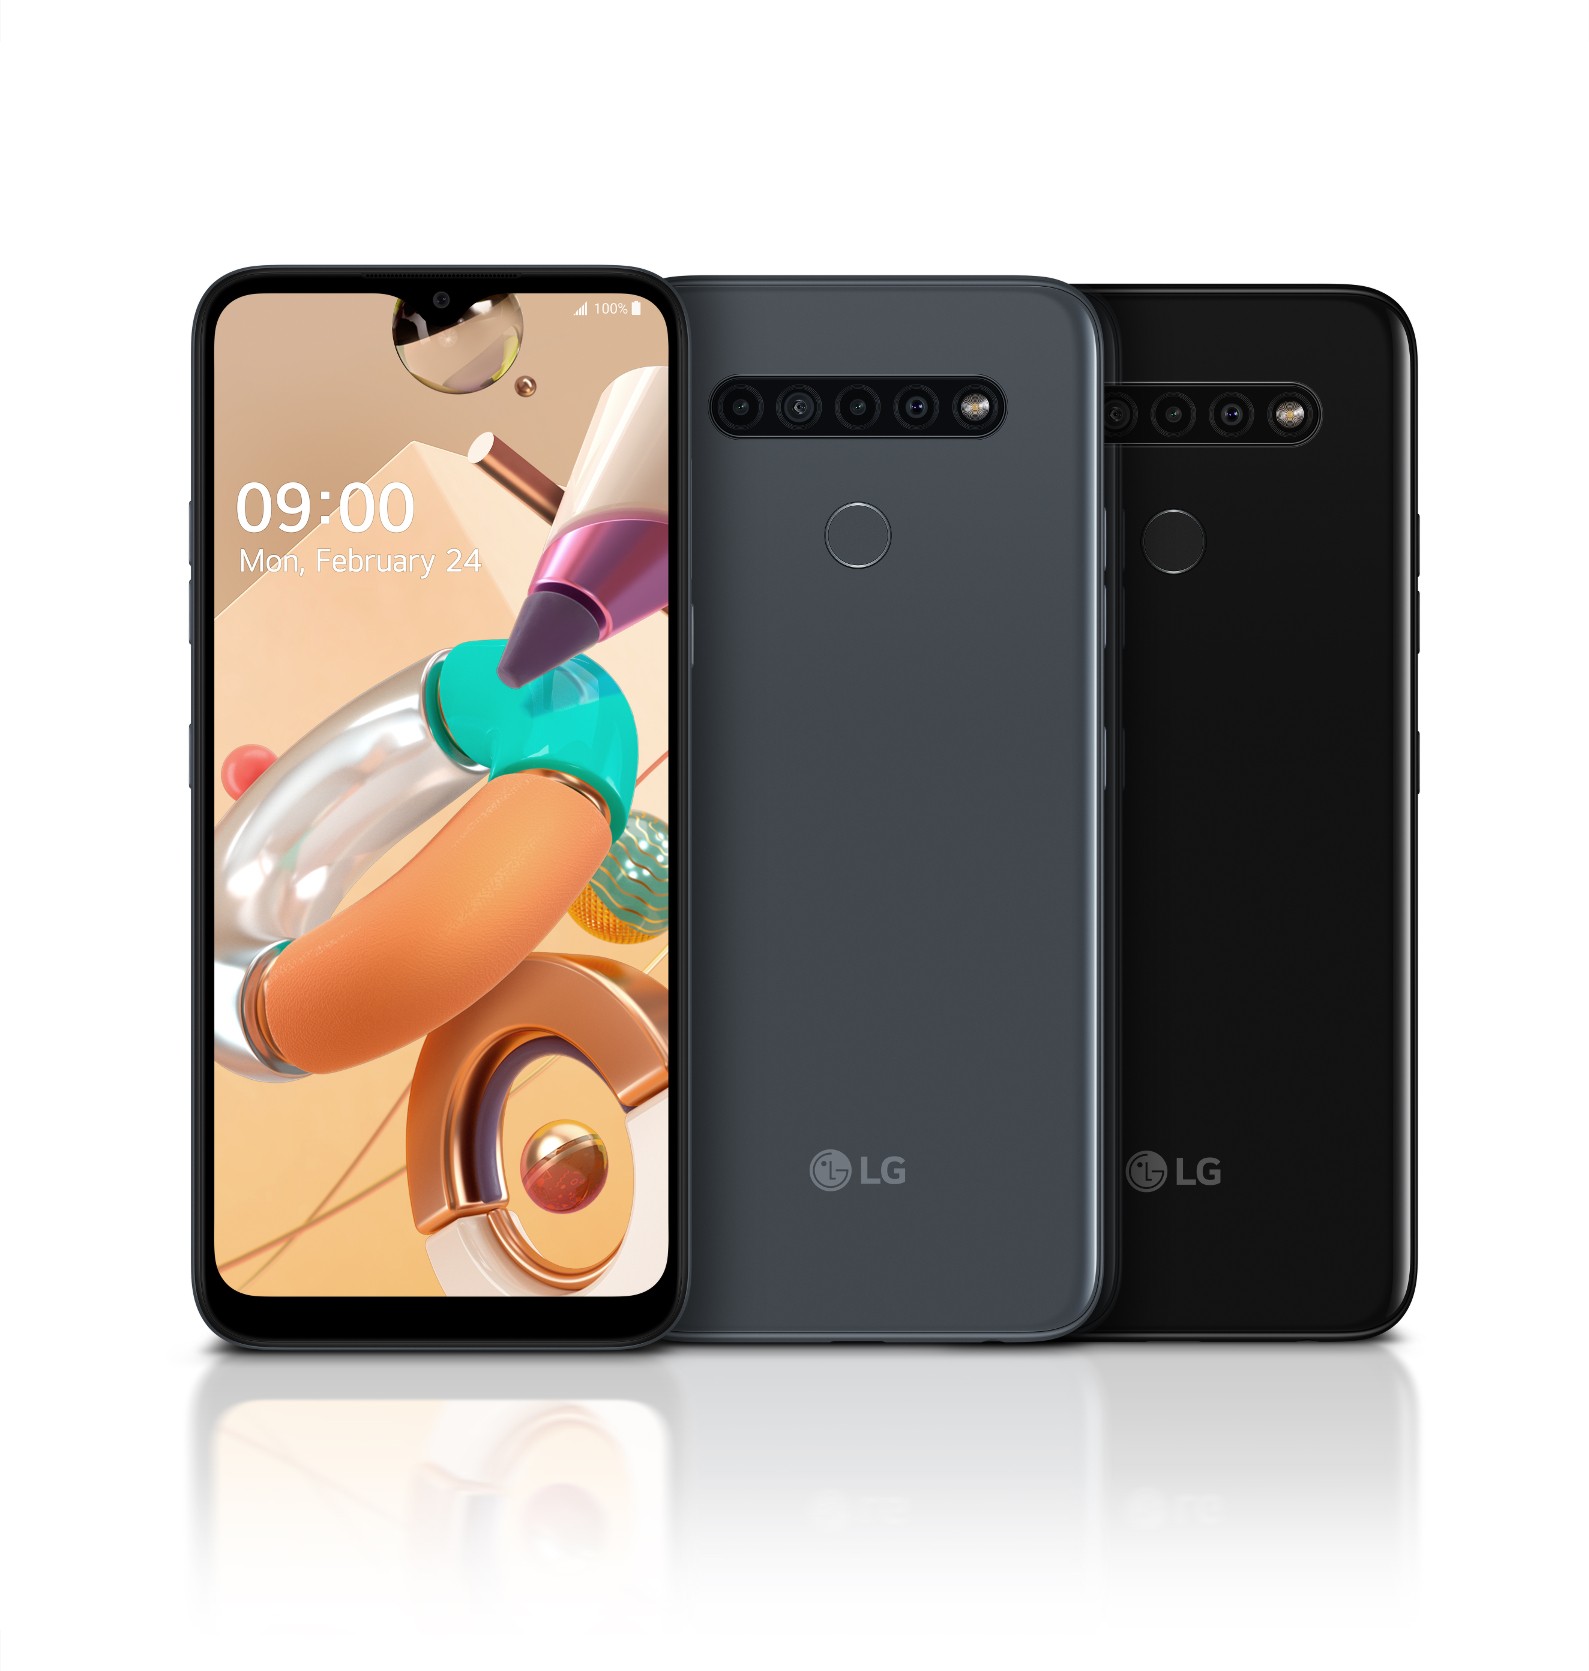 LG’S 2020 K SERIES DELIVERS PREMIUM CAMERA FEATURES TO EVEN MORE SMARTPHONE USERS | LG Newsroom